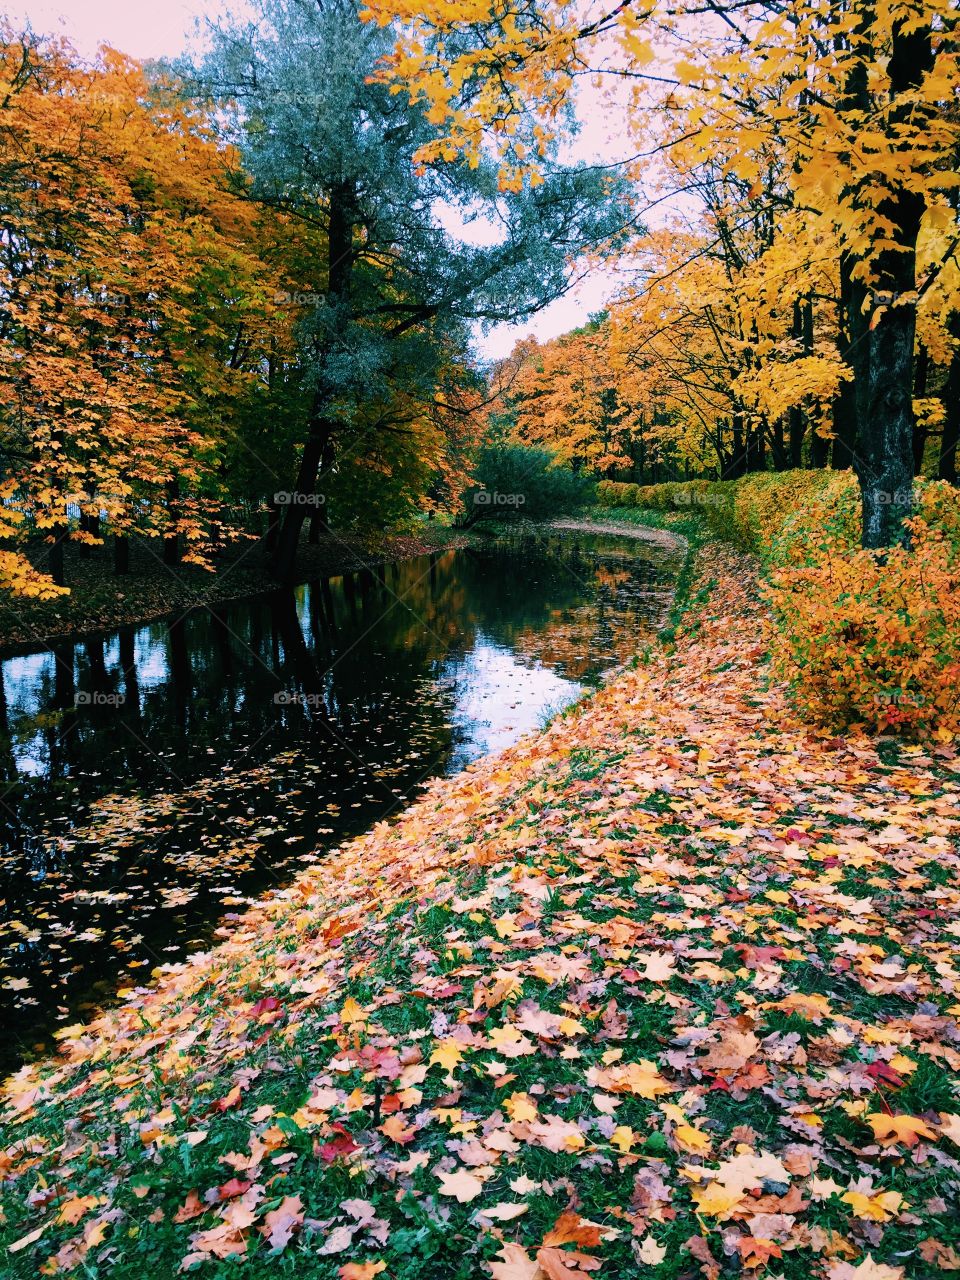 River in the park in the autumn 